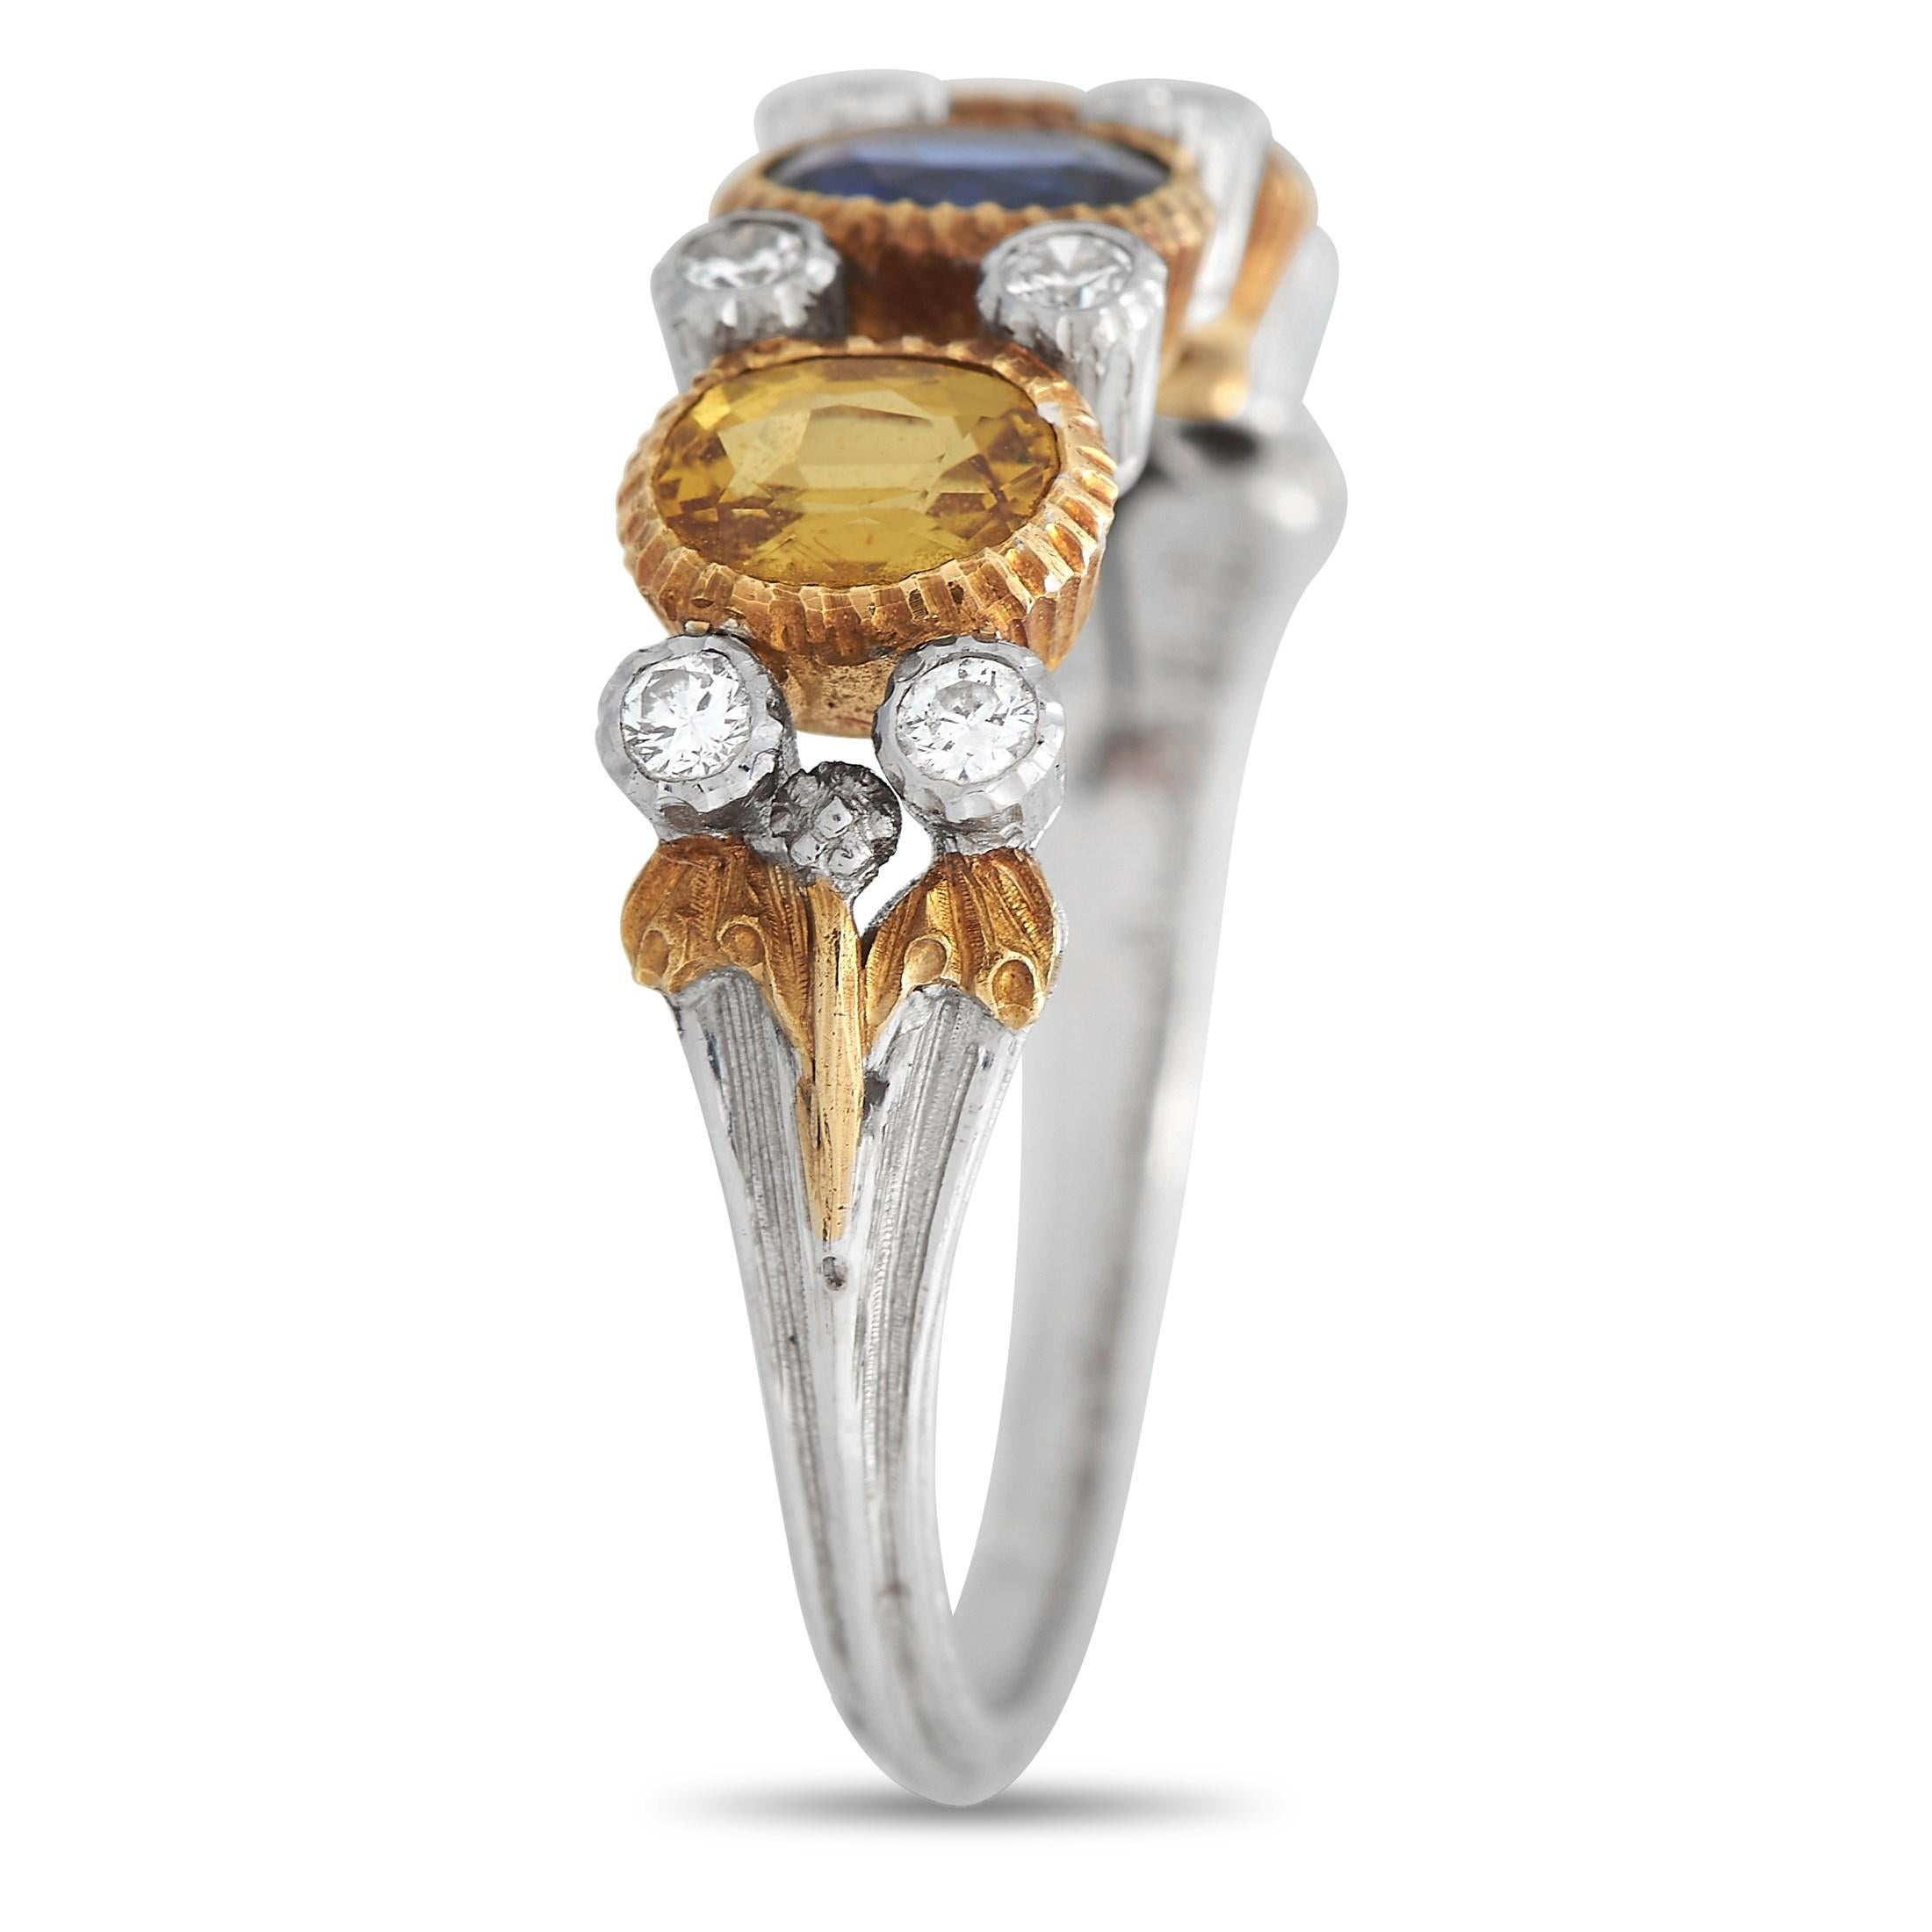 This Buccellati ring boasts an opulent design that exudes old-fashioned elegance. A trio of colorful sapphires totaling 1.19 carats shines from their place within the intricate 18K Yellow Gold setting. Dazzling diamond accents with a total weight of